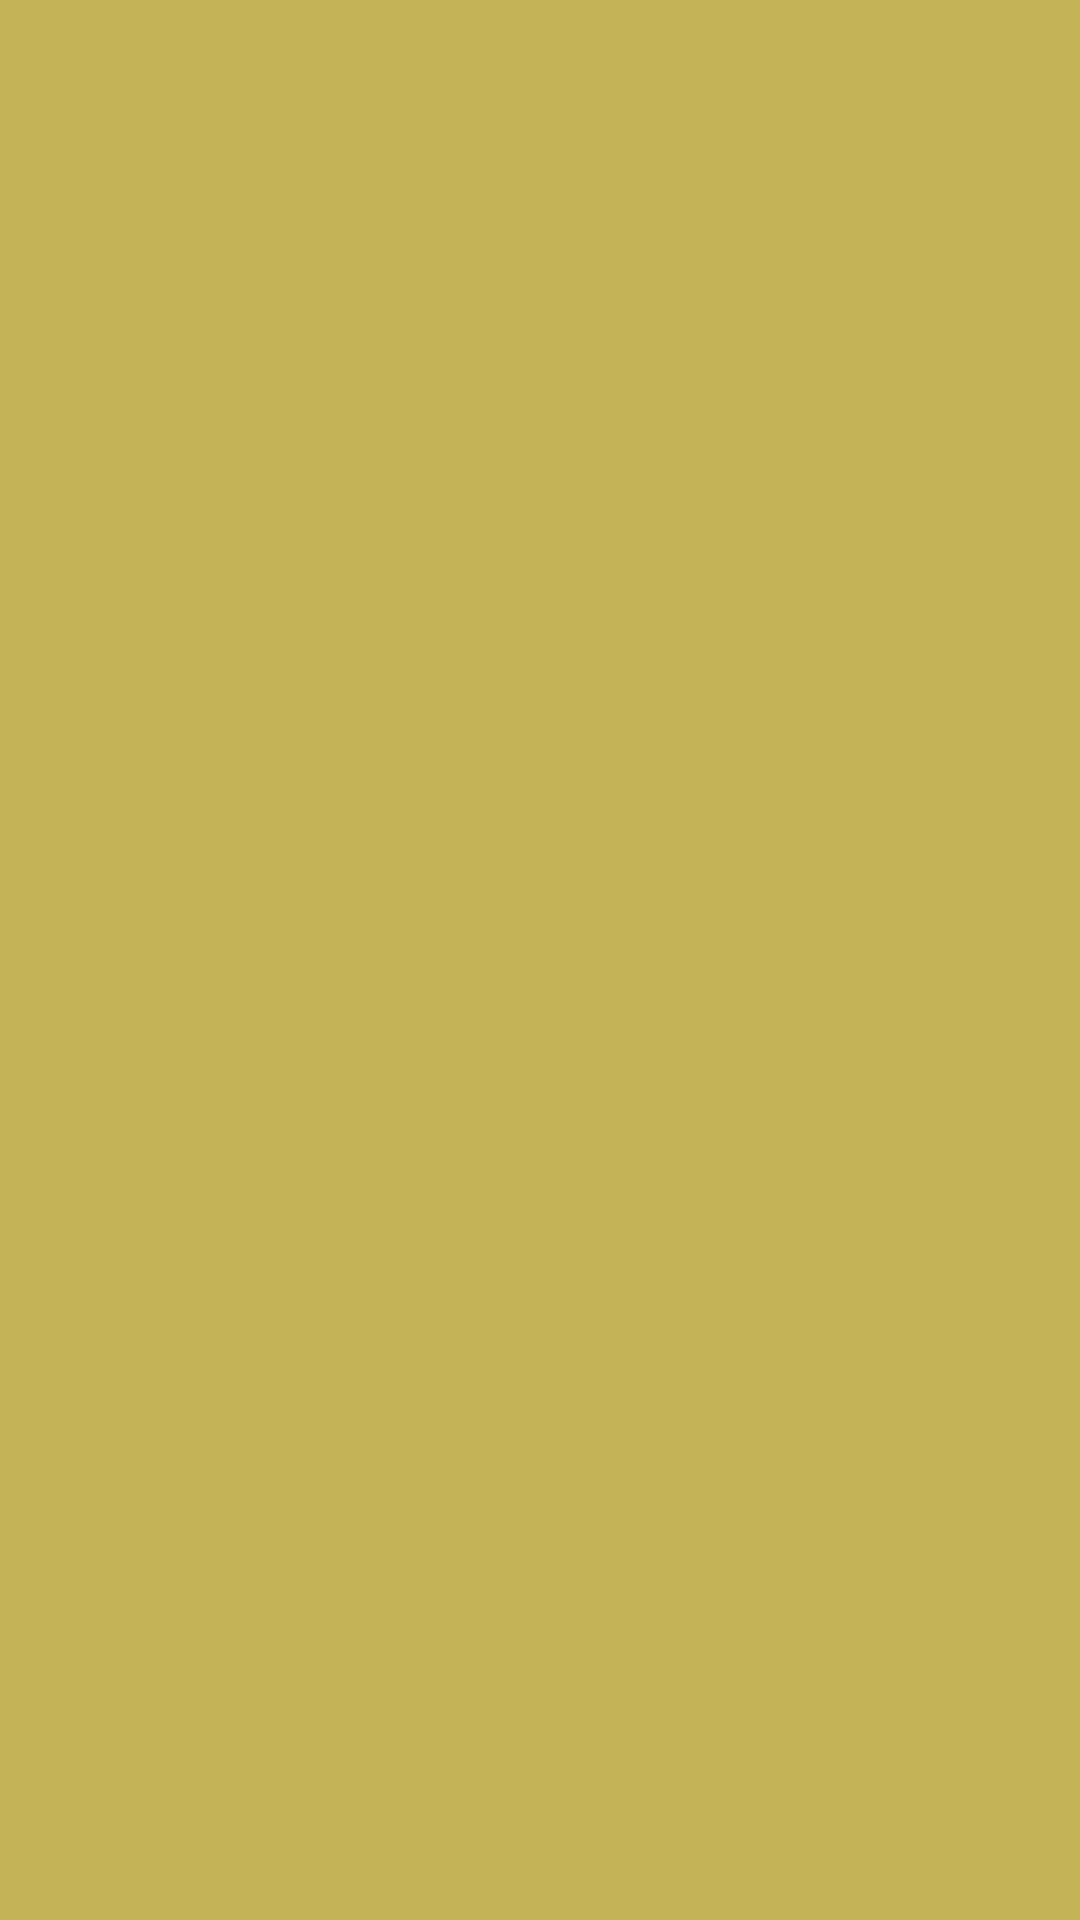 1080x1920 Vegas Gold Solid Color Background